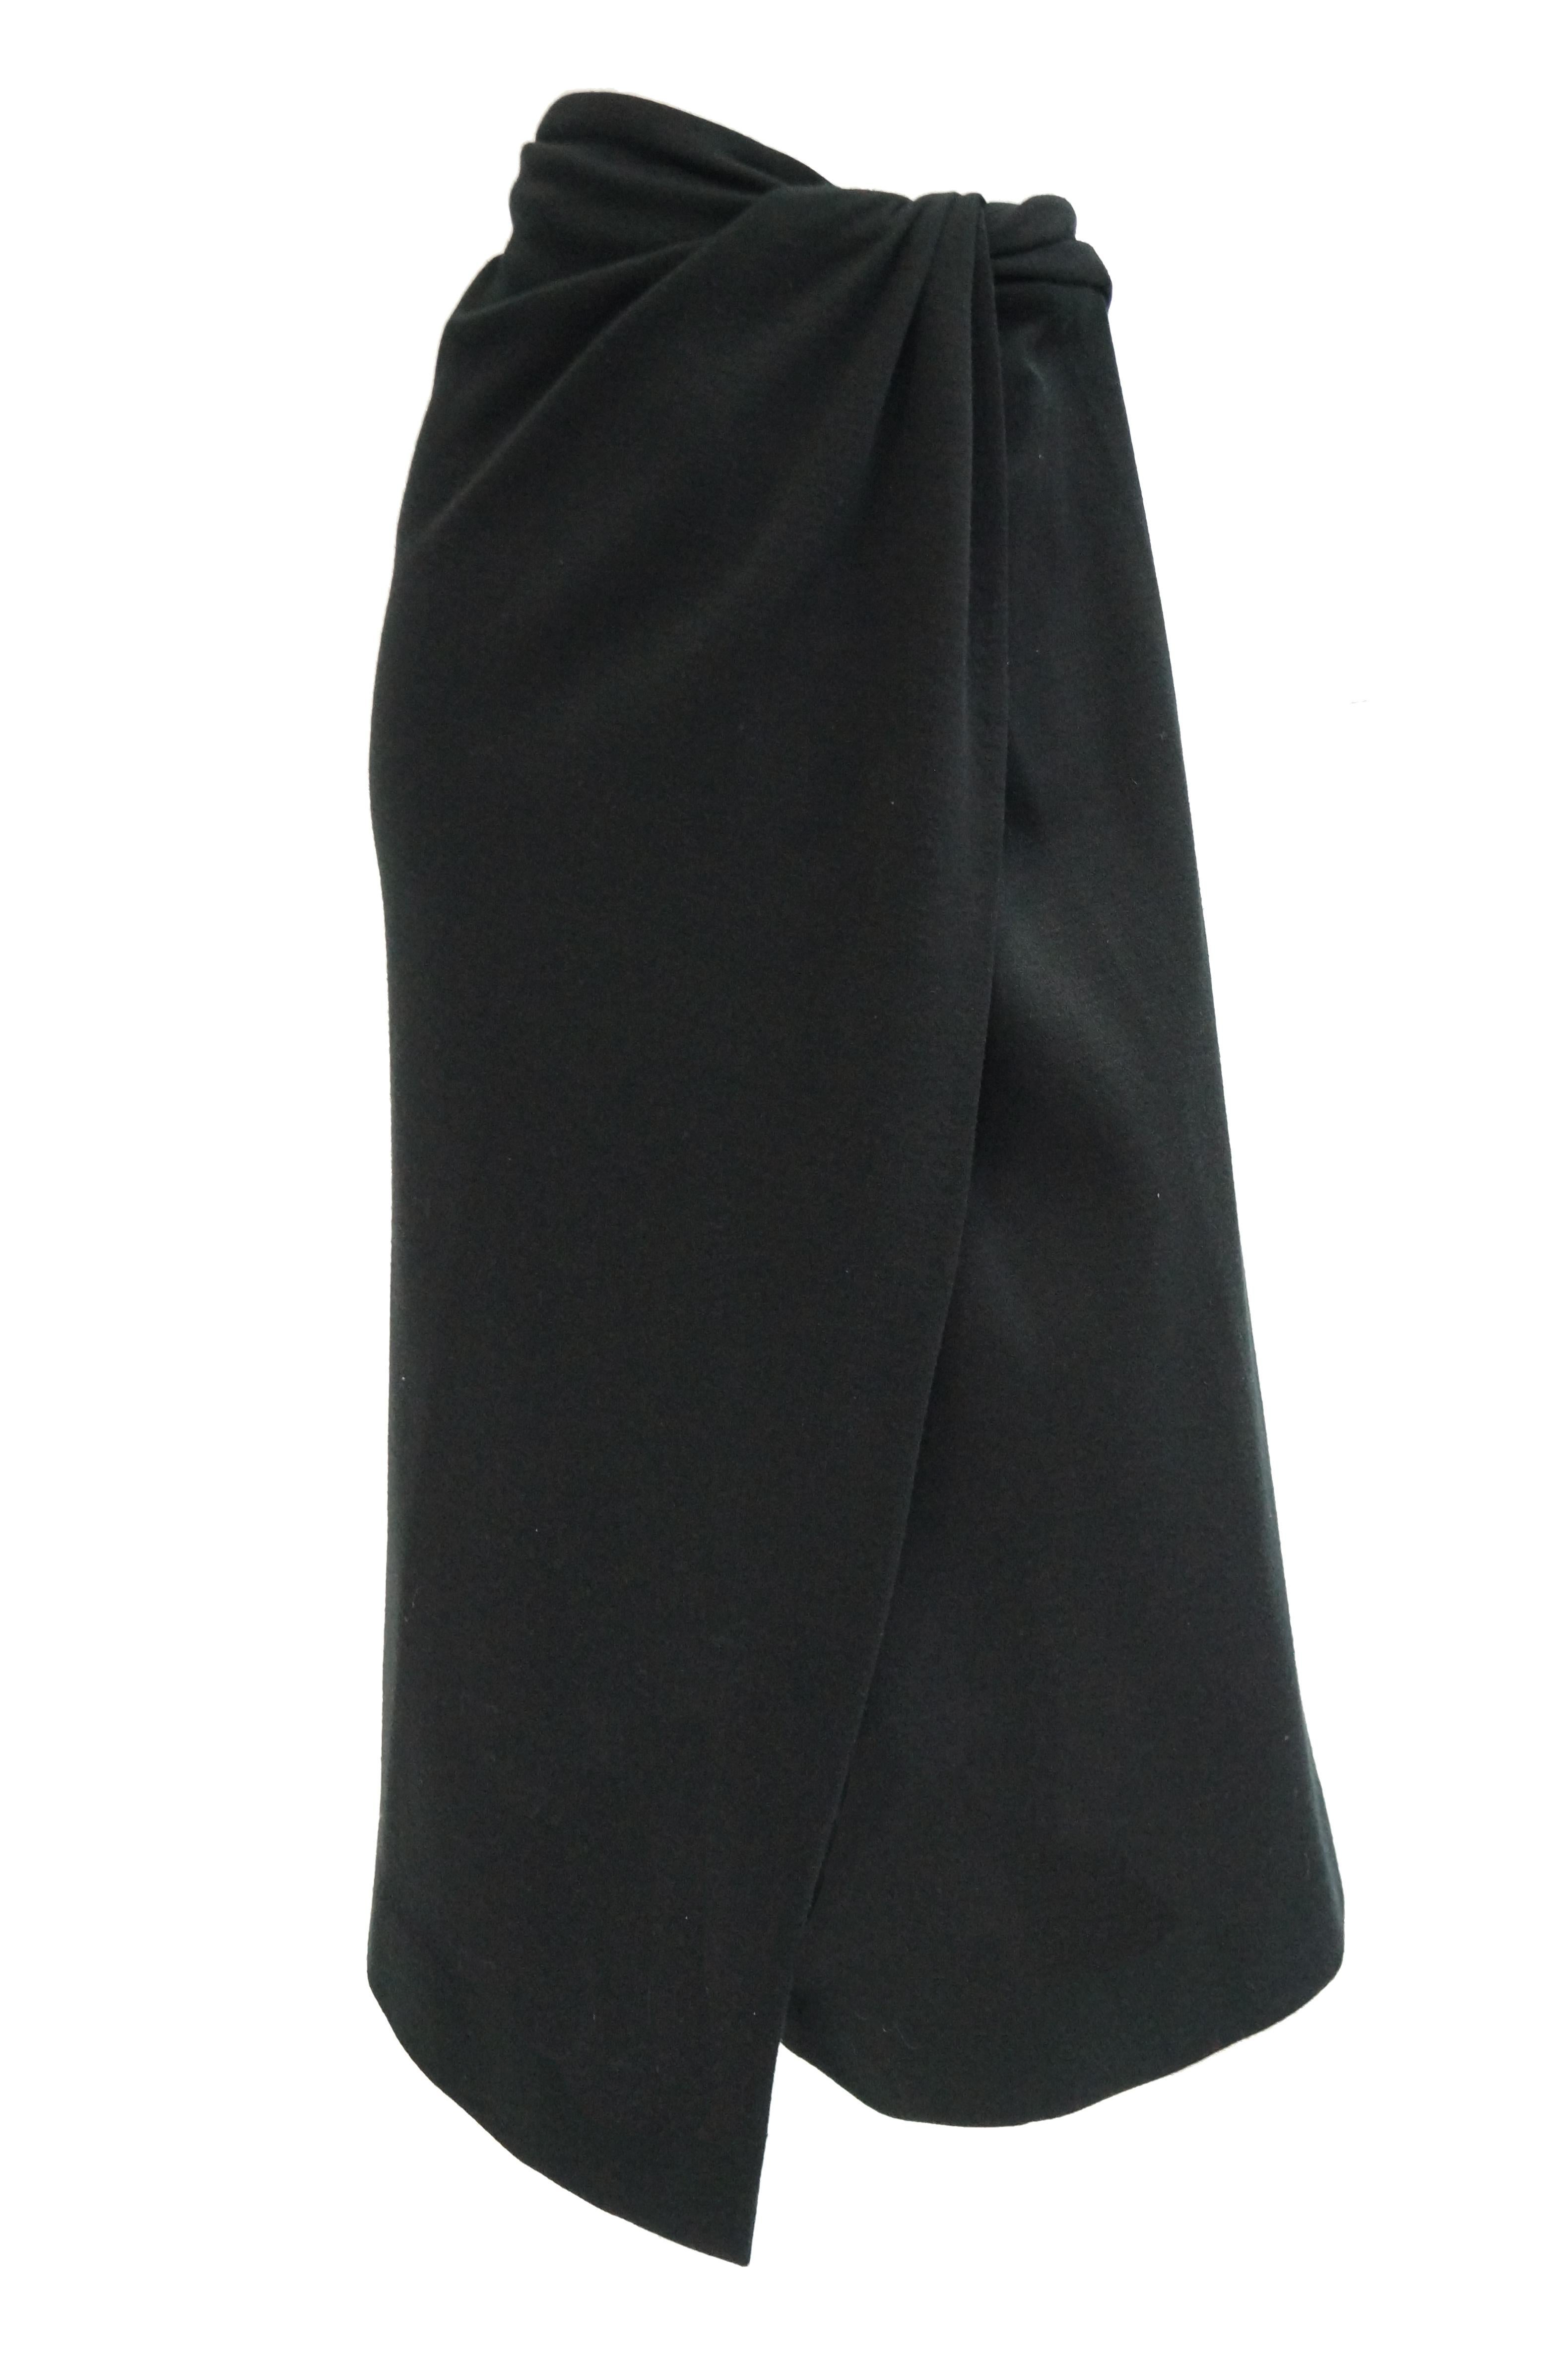 “THE wrap skirt” was designed in black lightweight wool goes with absolutely everything! 

In 1985, after having worked at Anne Klein for over a decade (Klein so trusted her judgement that she brought Karan with her to the famous 